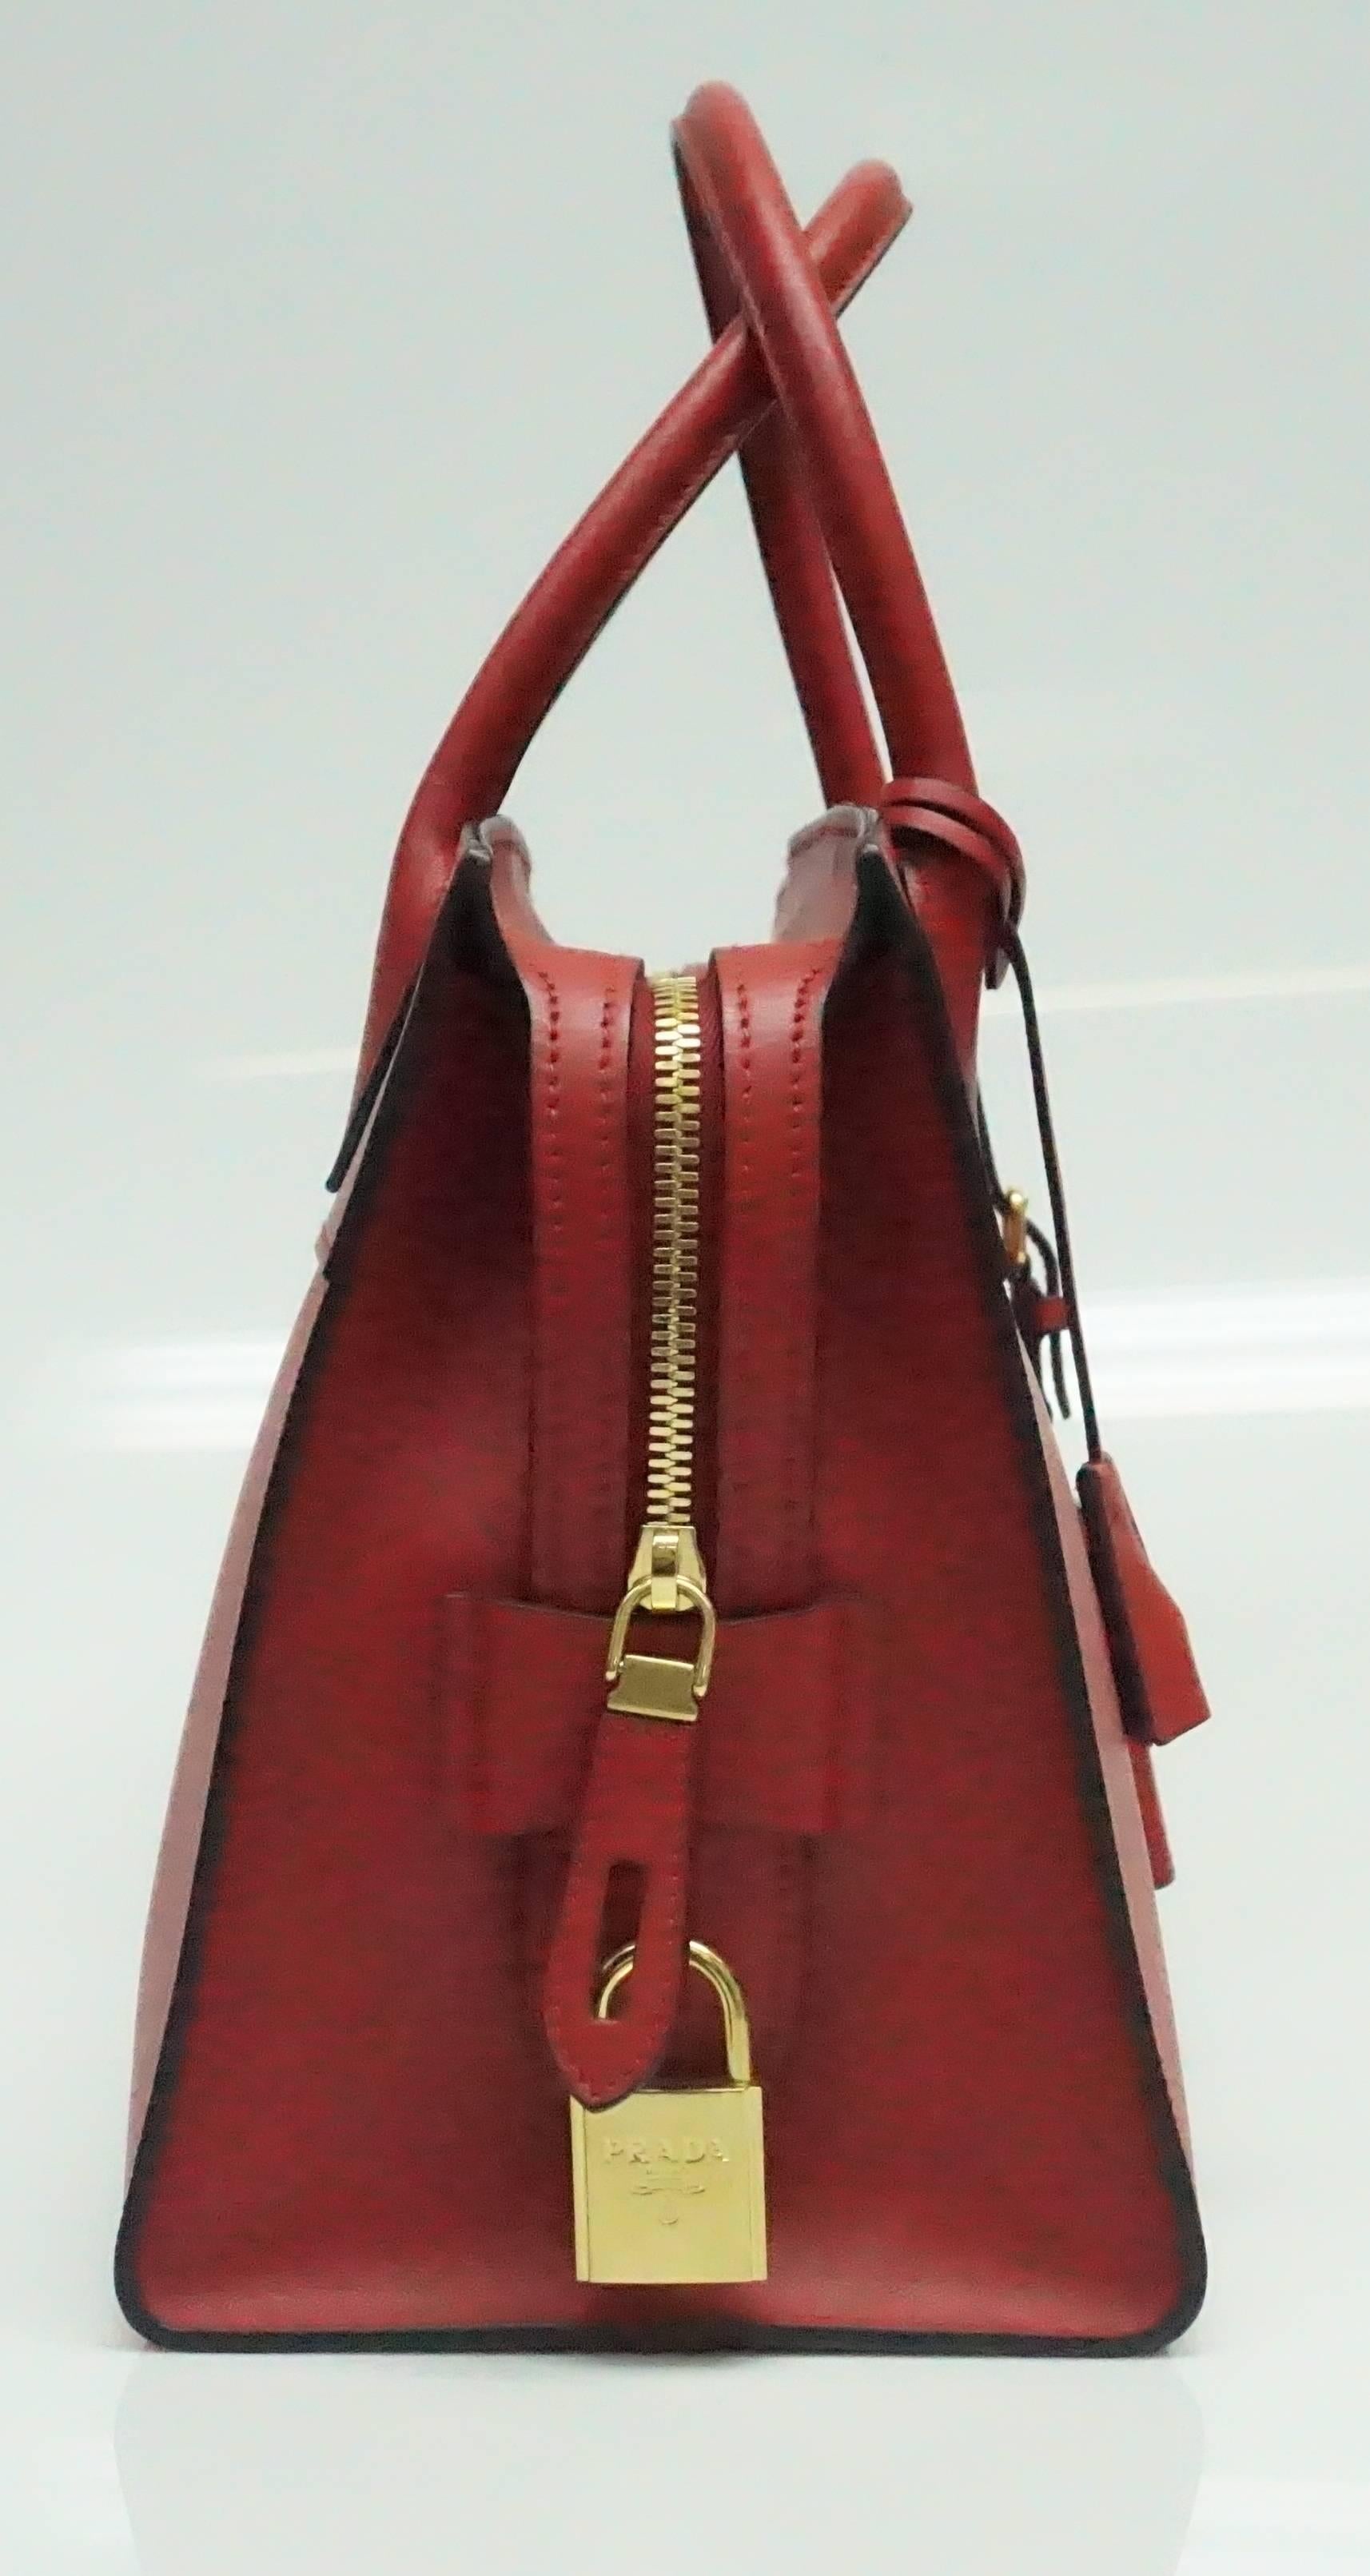 Prada Red Saffiano City Handbag - NEW  This new and still in stores fabulous red handbag by Prada is just the right pop of color. The bag has a top handle and a detachable shoulder strap so that you can wear over the shoulder or as a crossbody. The